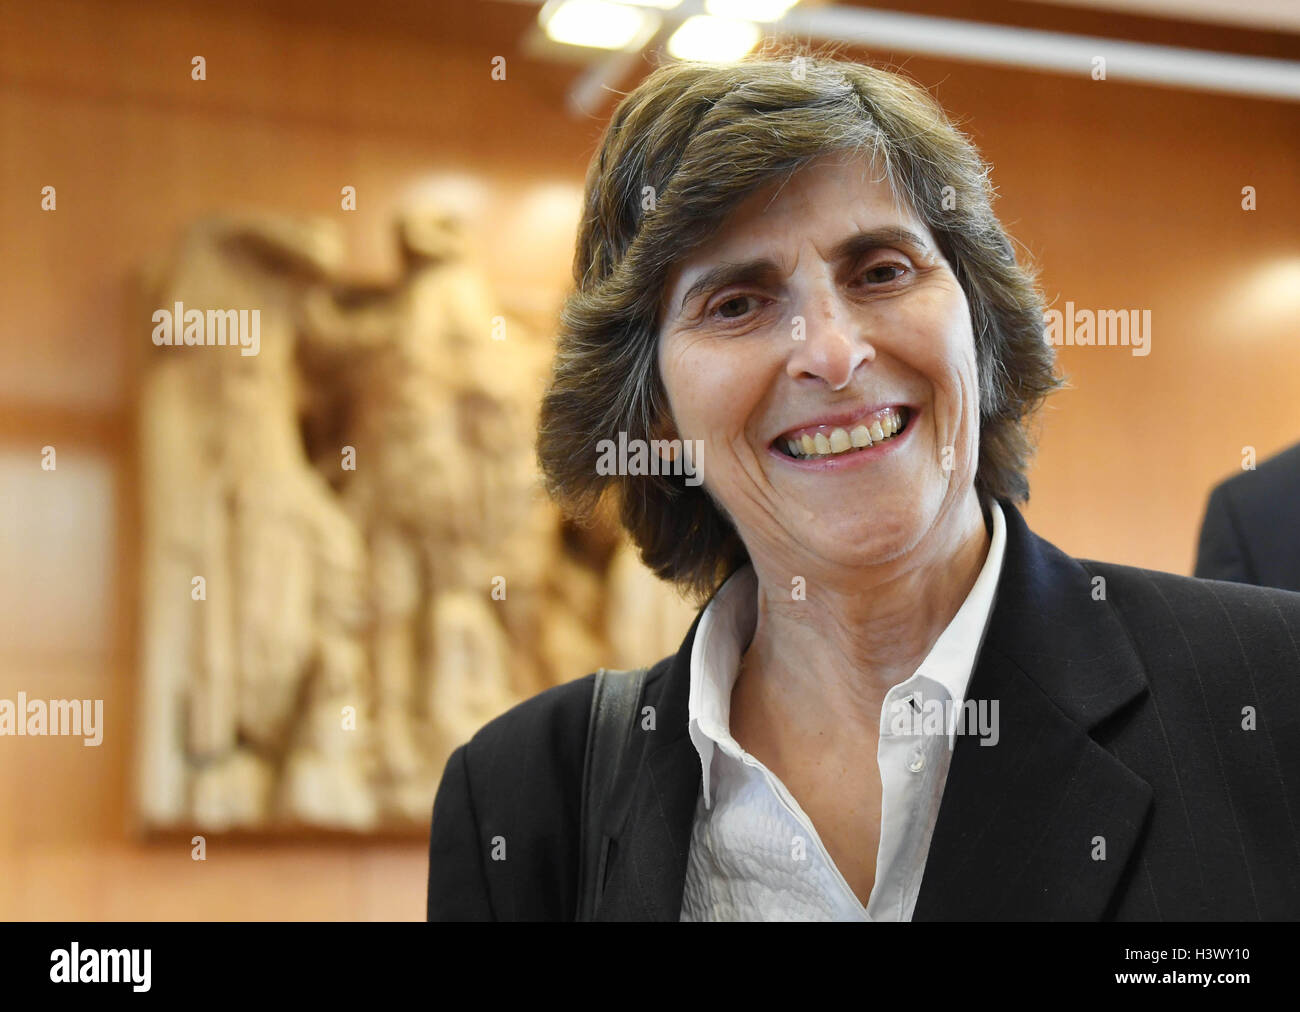 Karlsruhe, Germany. 12th Oct, 2016. Complainant Marianne Grimmenstein-Balas arrives for the start of the trials regarding the emergency appeal against the trade agreement CETA in Karlsruhe, Germany, 12 October 2016. Photo: Uli Deck/dpa/Alamy Live News Stock Photo